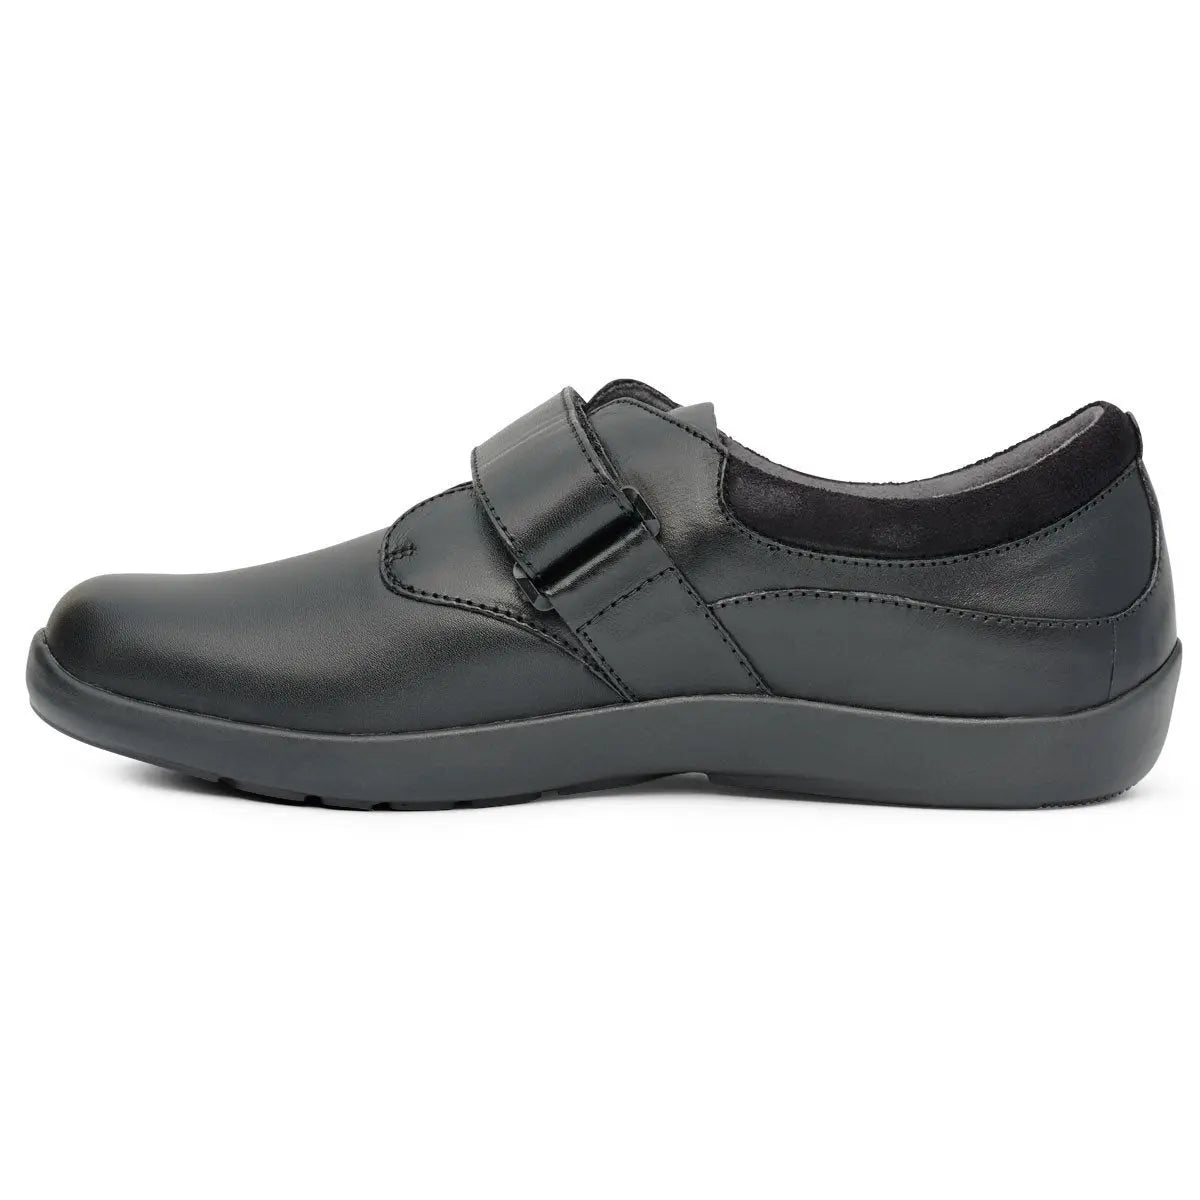 Anodyne No.63 Therapeutic Diabetic Orthopedic Casual Comfort Stretch Shoe - side view | Dahlmedicalsupply.com